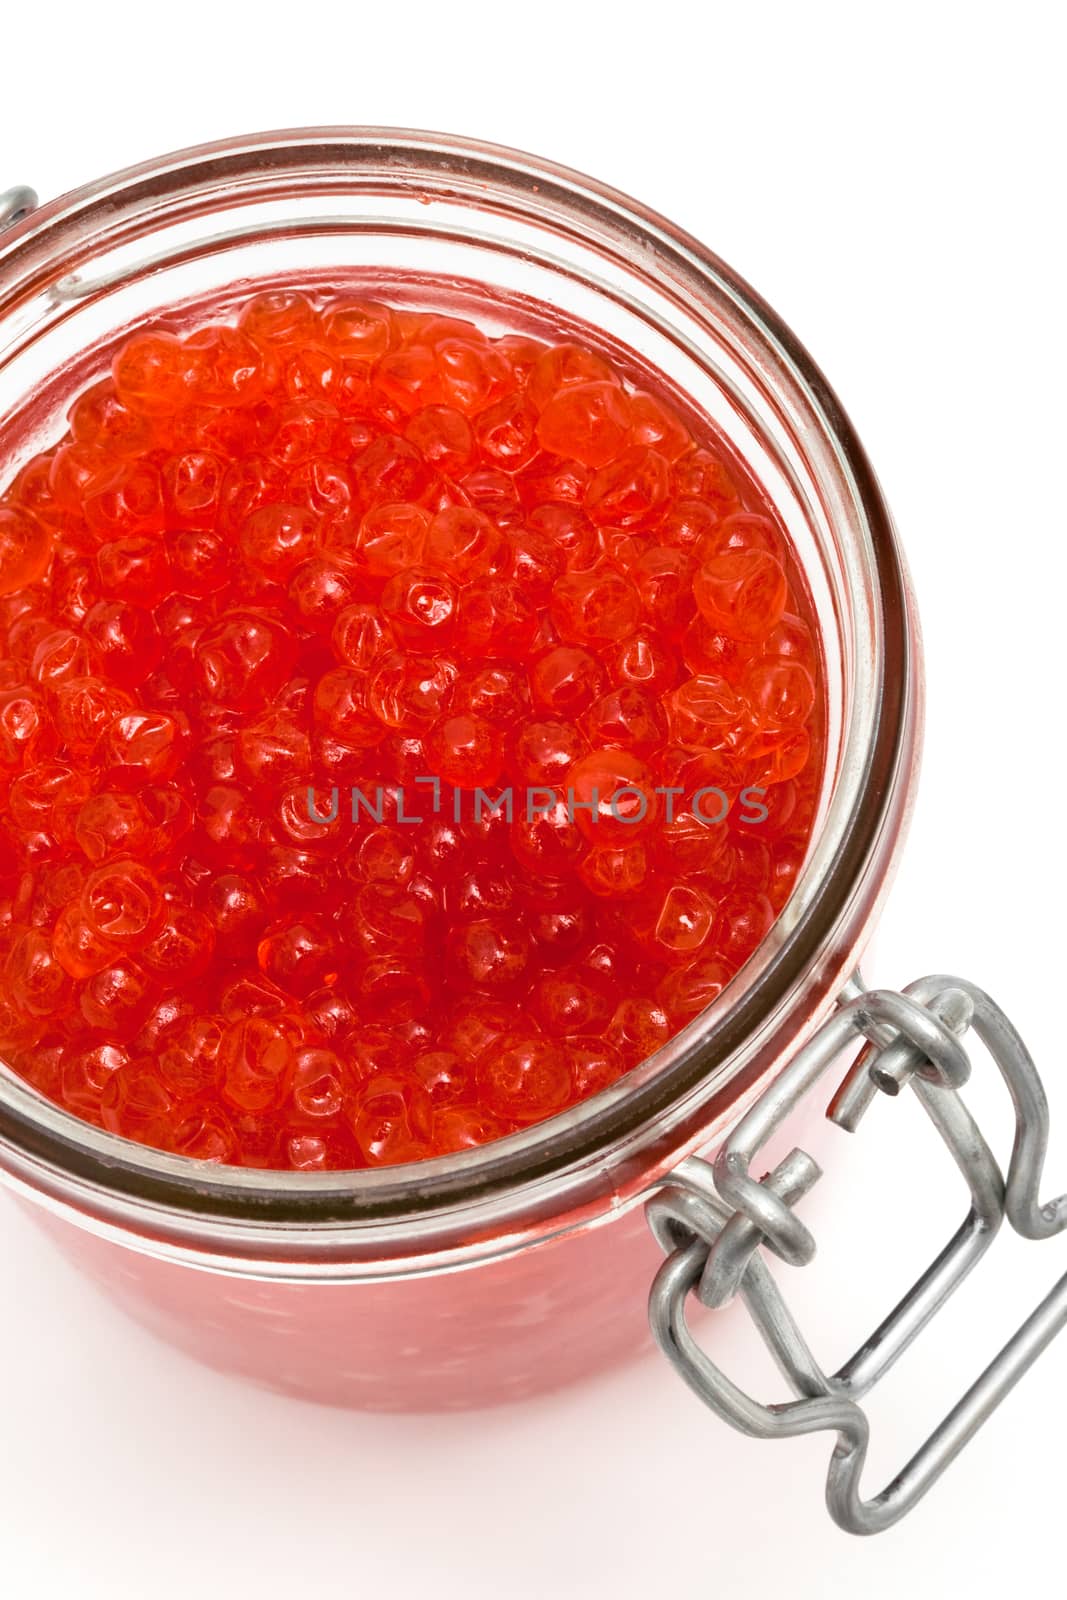 Red caviar by terex